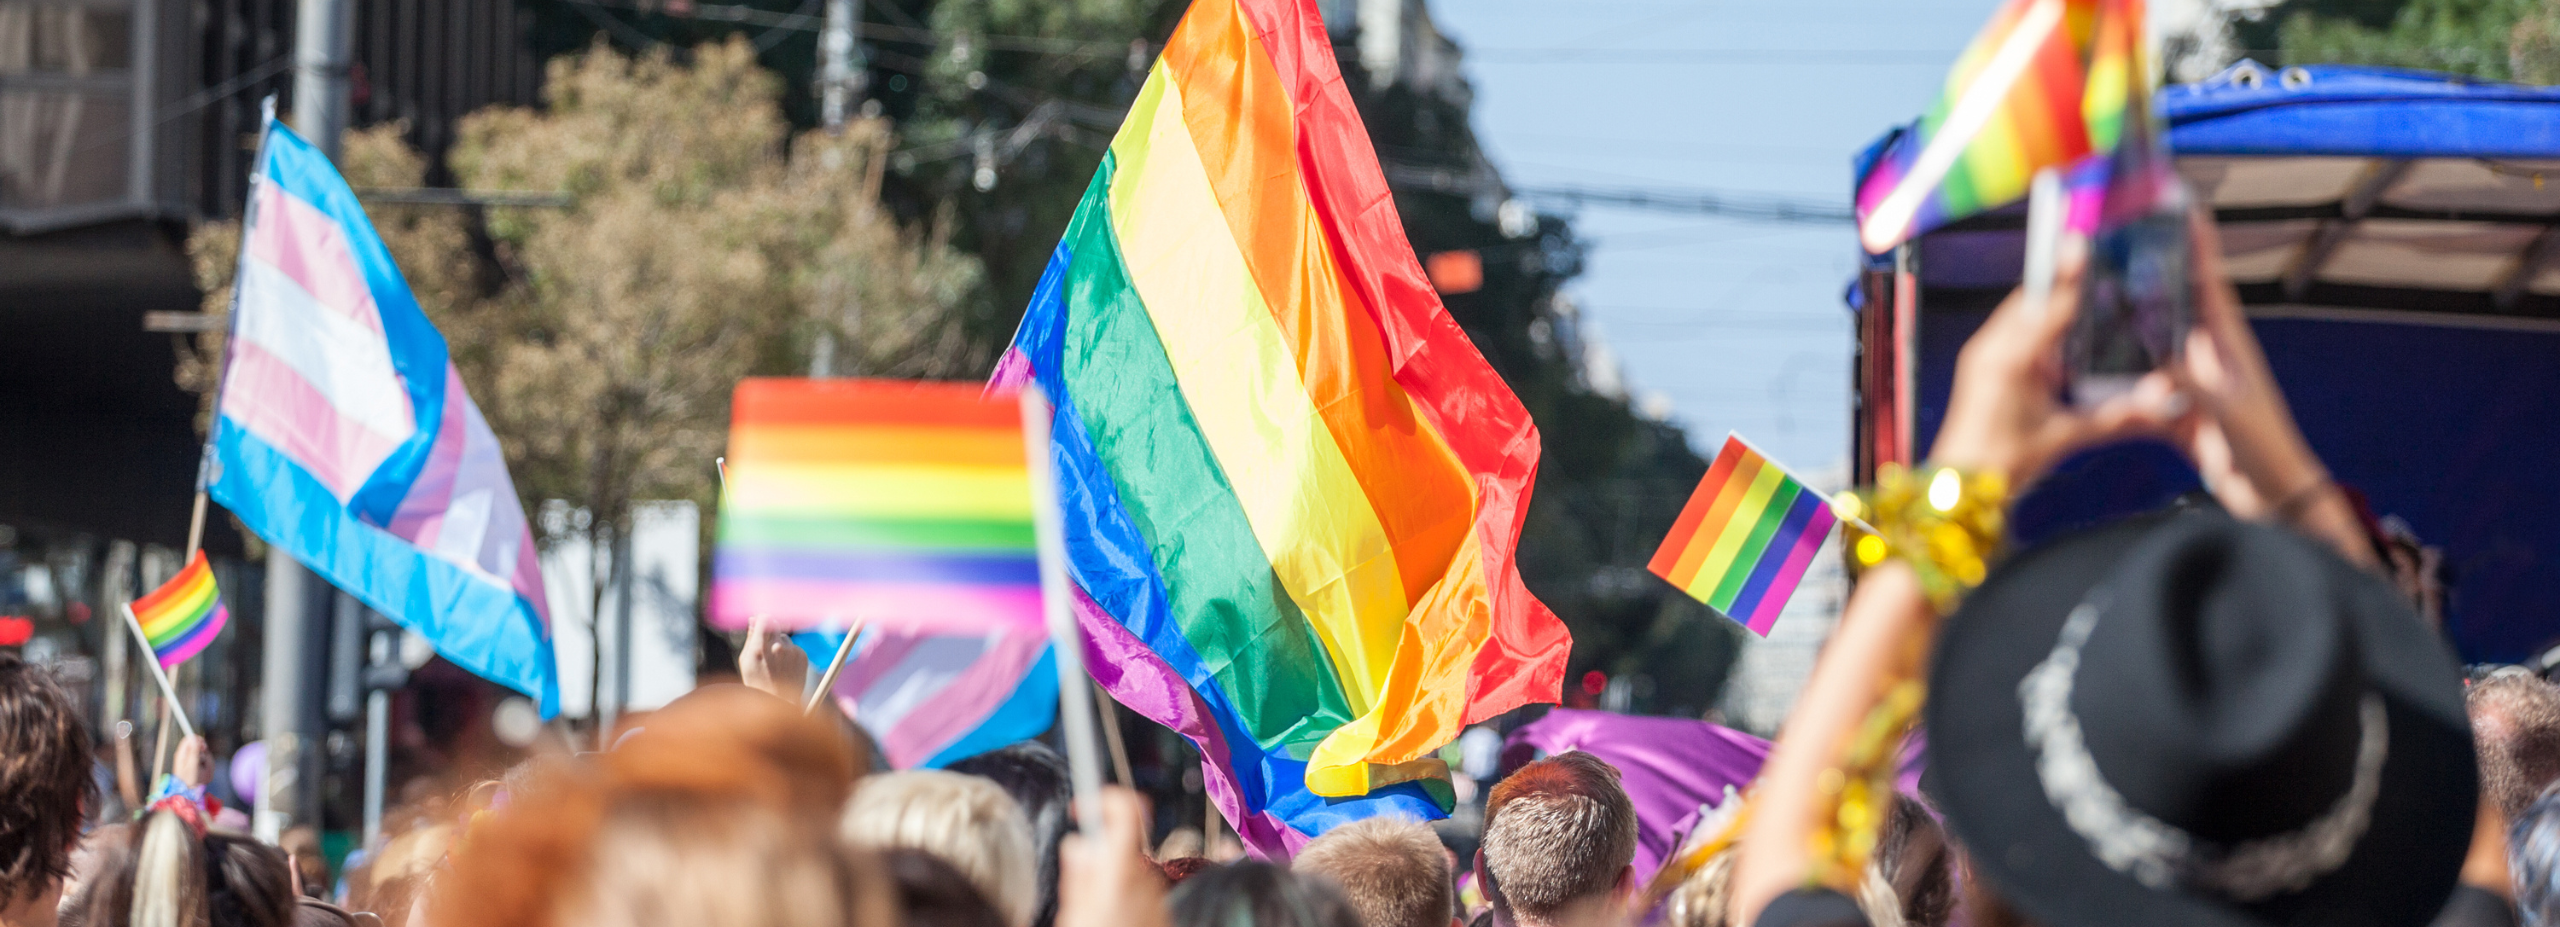 A group of people wave rainbow flags and flags representing transgender people at a parade. 